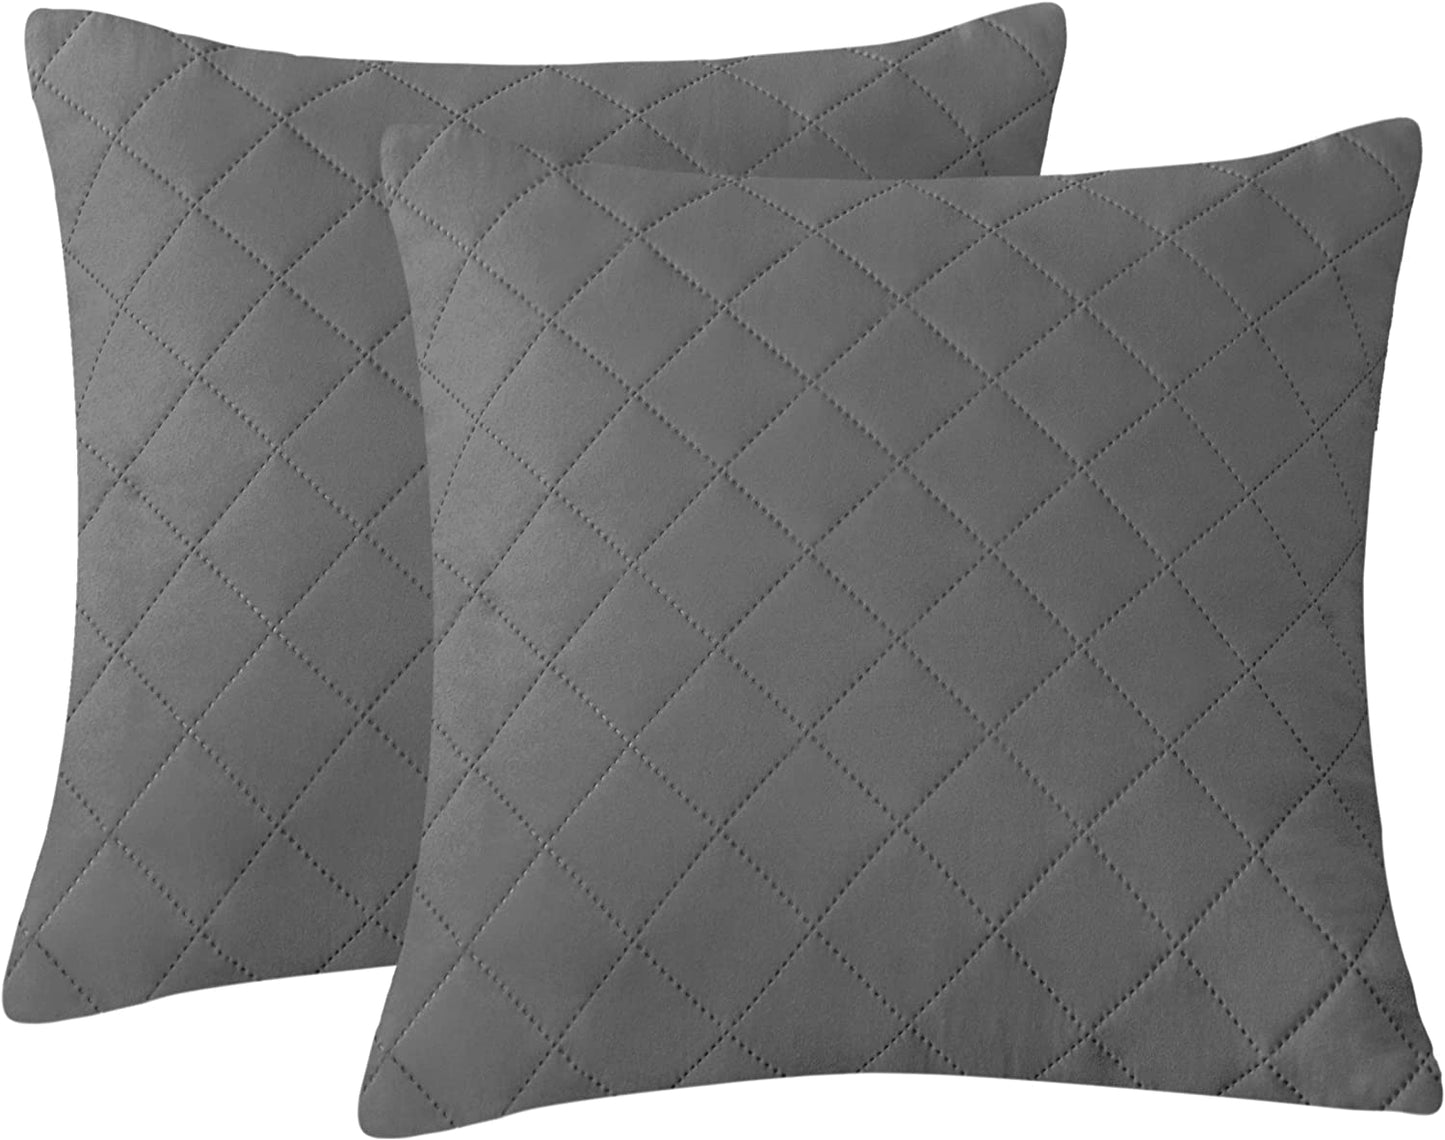 Quilted Cushion Cover Square Pattren 16"x16"Light Grey